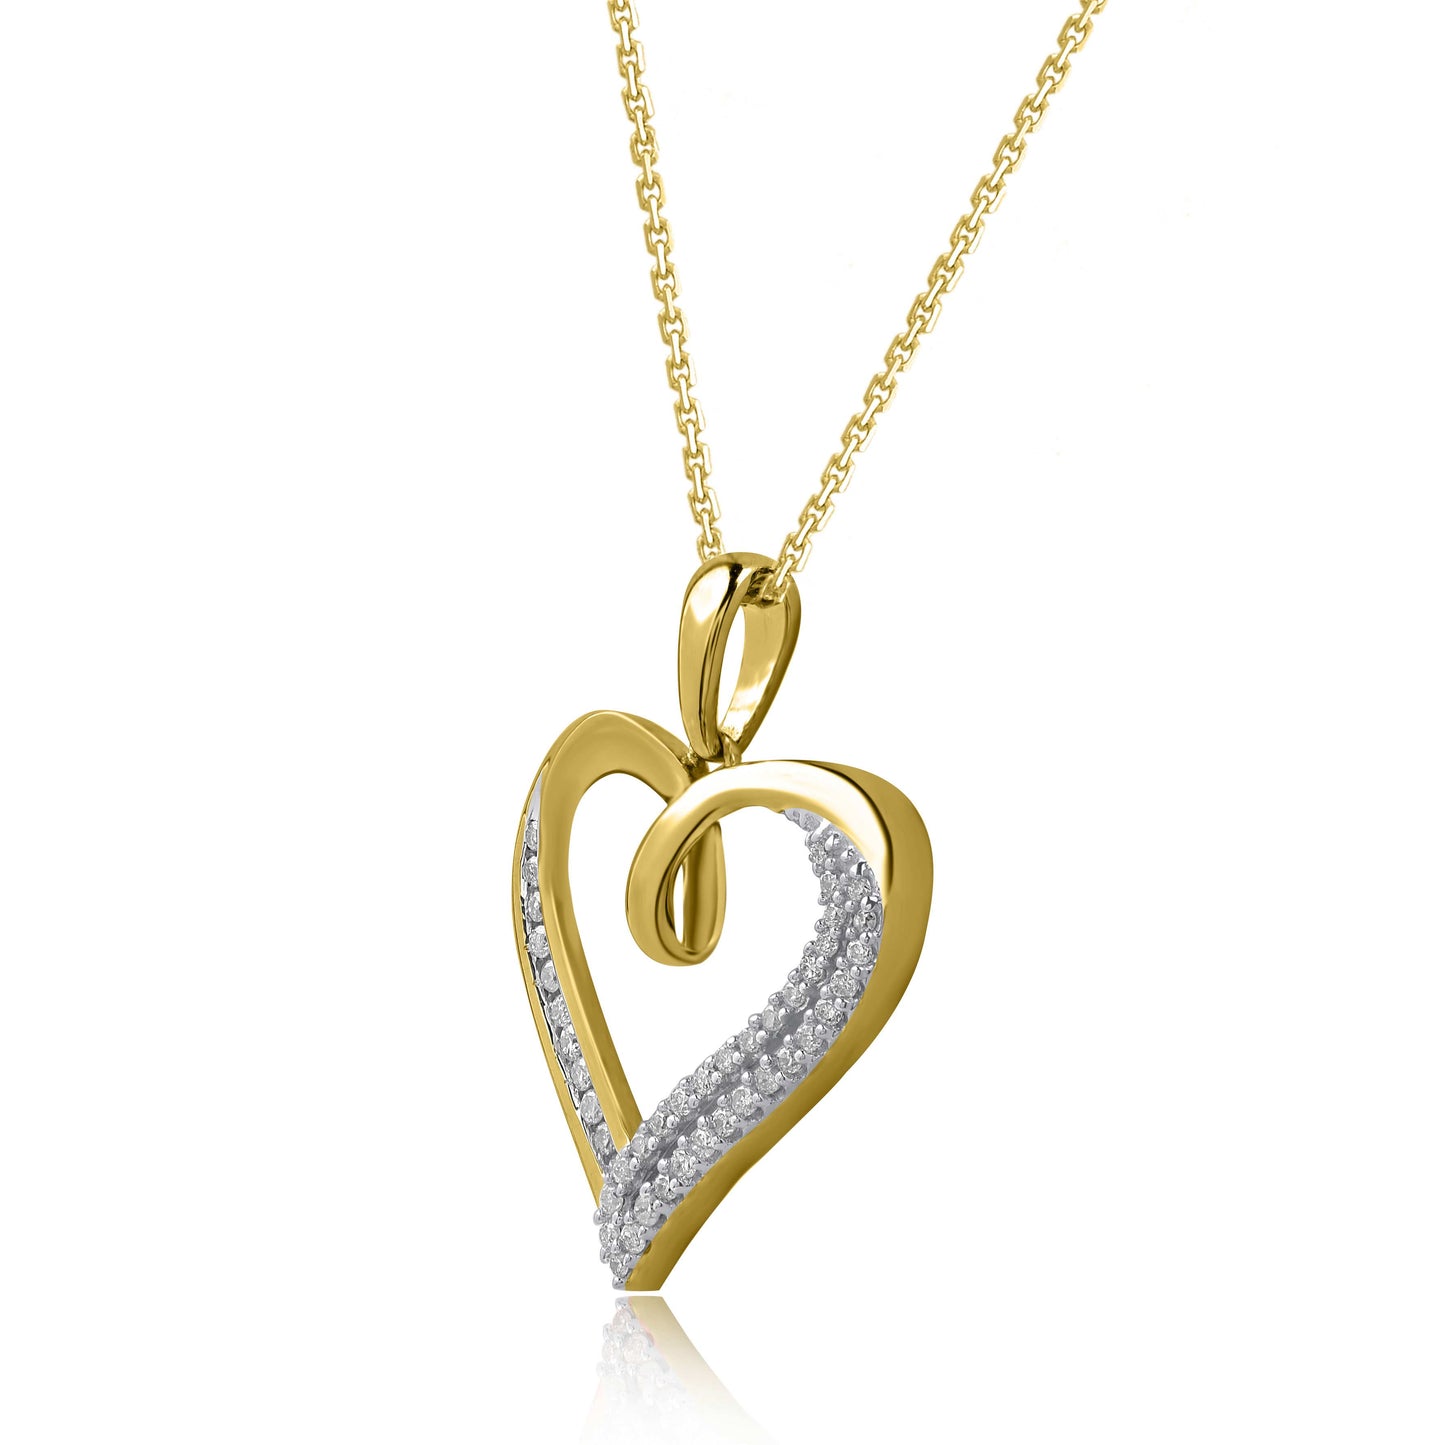 Heart Pendant Necklace in 10 Gold